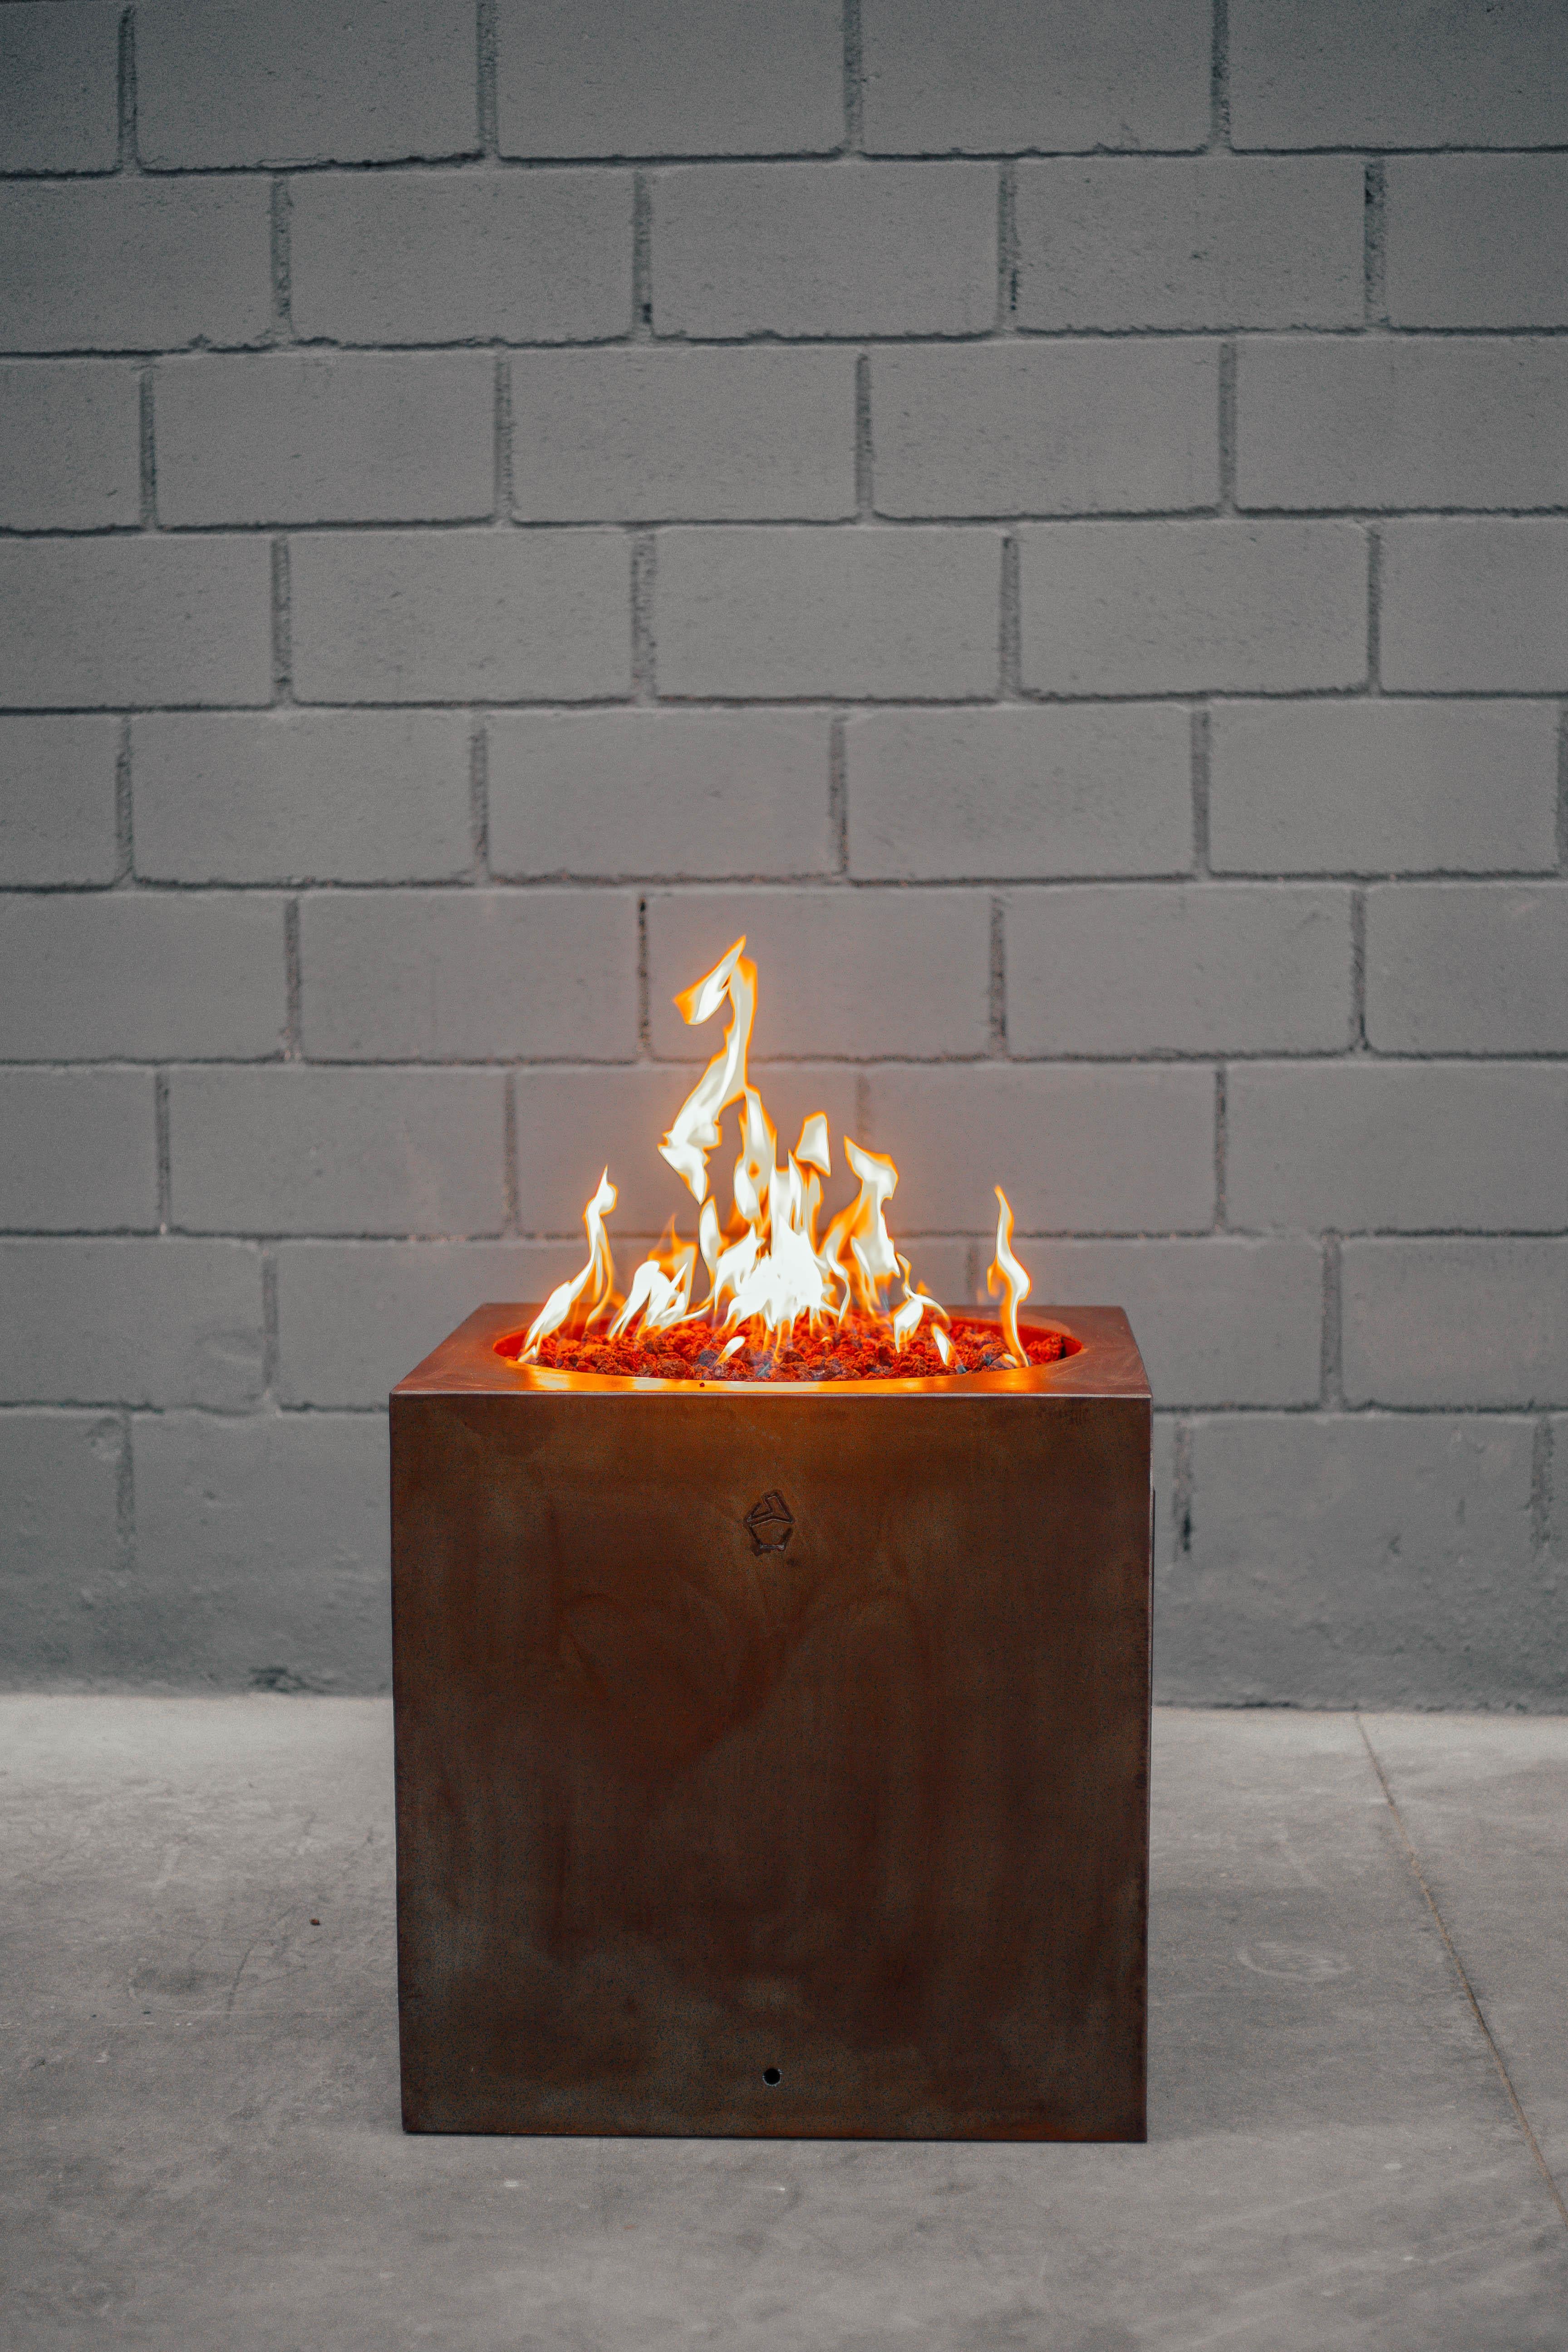 Oxidazed cubus firepit by Andres Monnier.
Dimensions: 60 x 60 x H 60 cm.
Materials: stainless steel. 
Technique: polished stainless steel. 

The design of this collection is based on geometry, where we unite different basic shapes to create